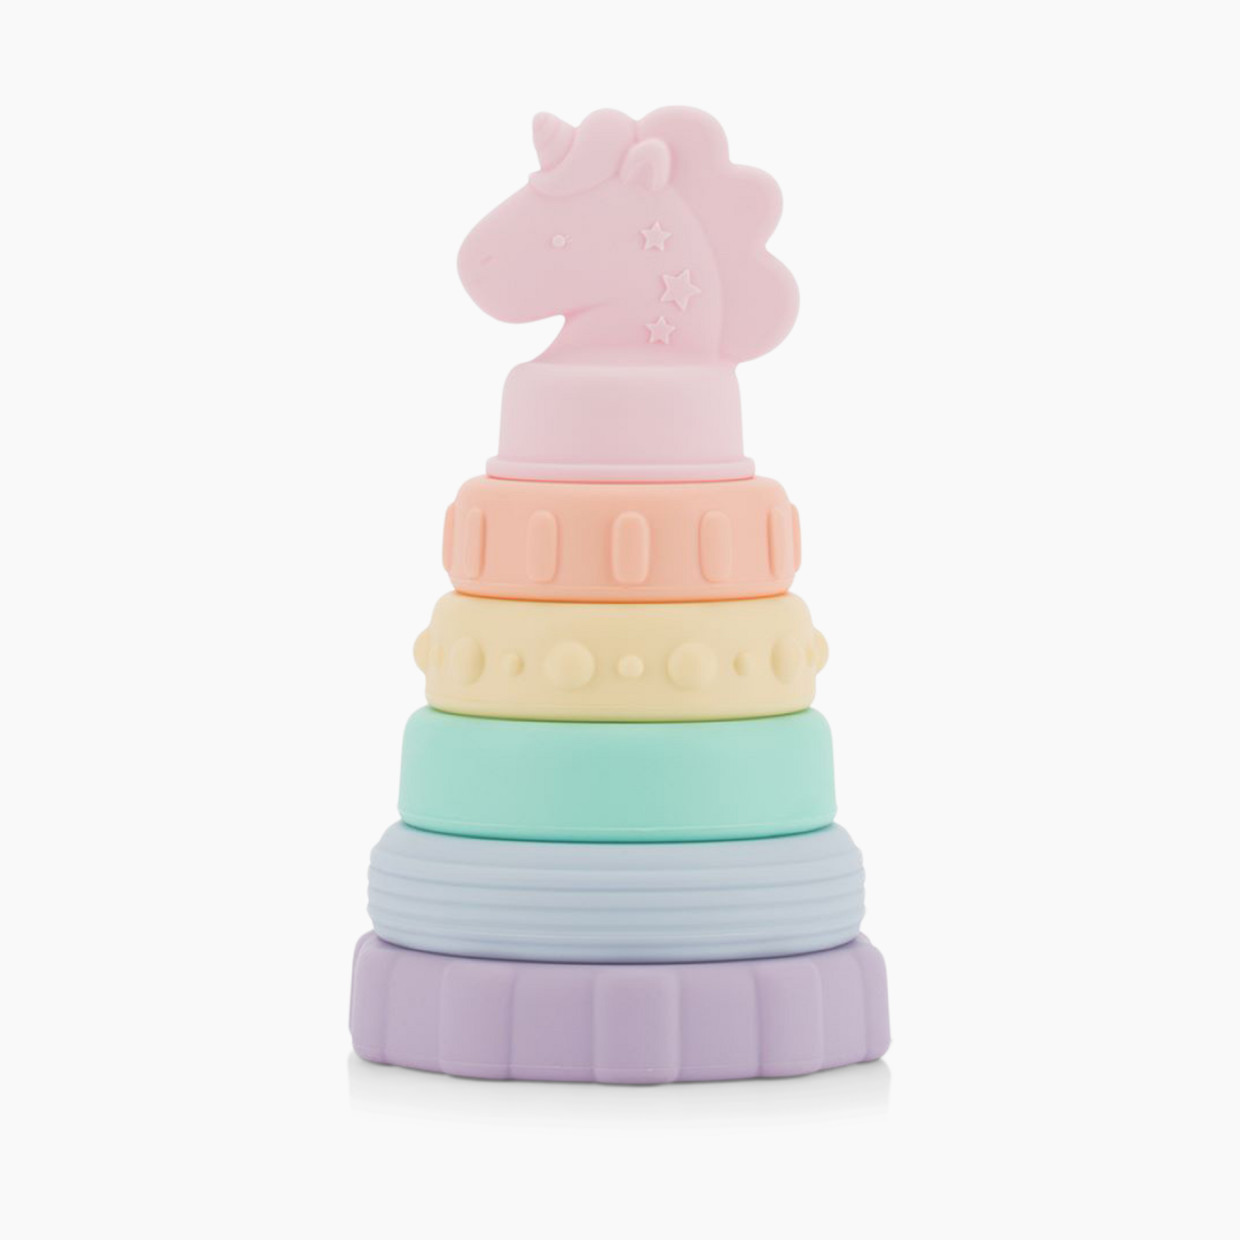 Itzy Ritzy Silicone Stacking and Teething Toy - Unicorn.